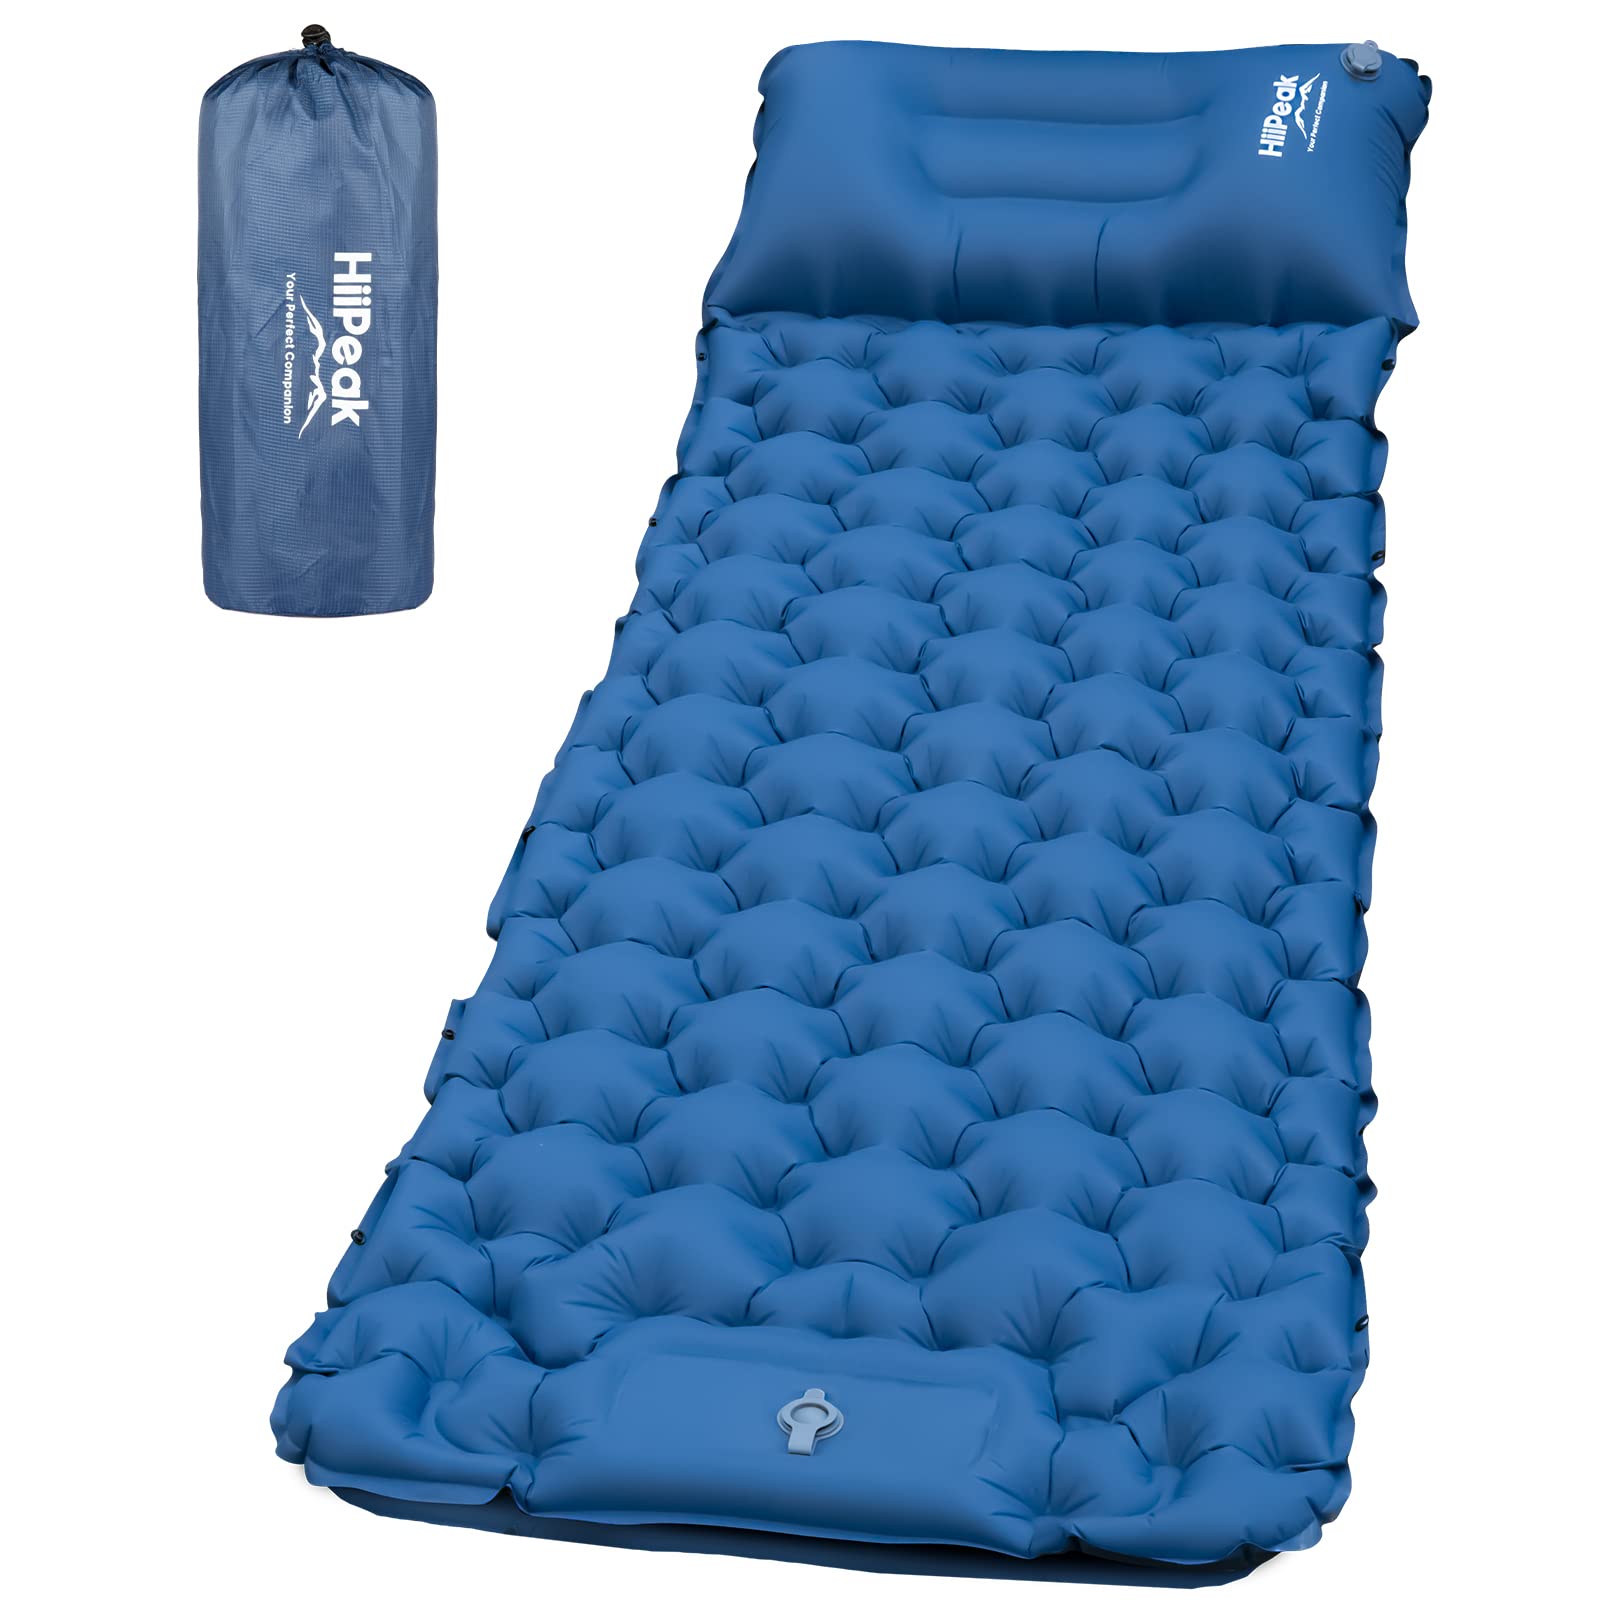 HiiPeak Sleeping Pad for camping- Ultralight Inflatable Sleeping Mat with Built-in Foot Pump, Upgraded Durable compact camping A